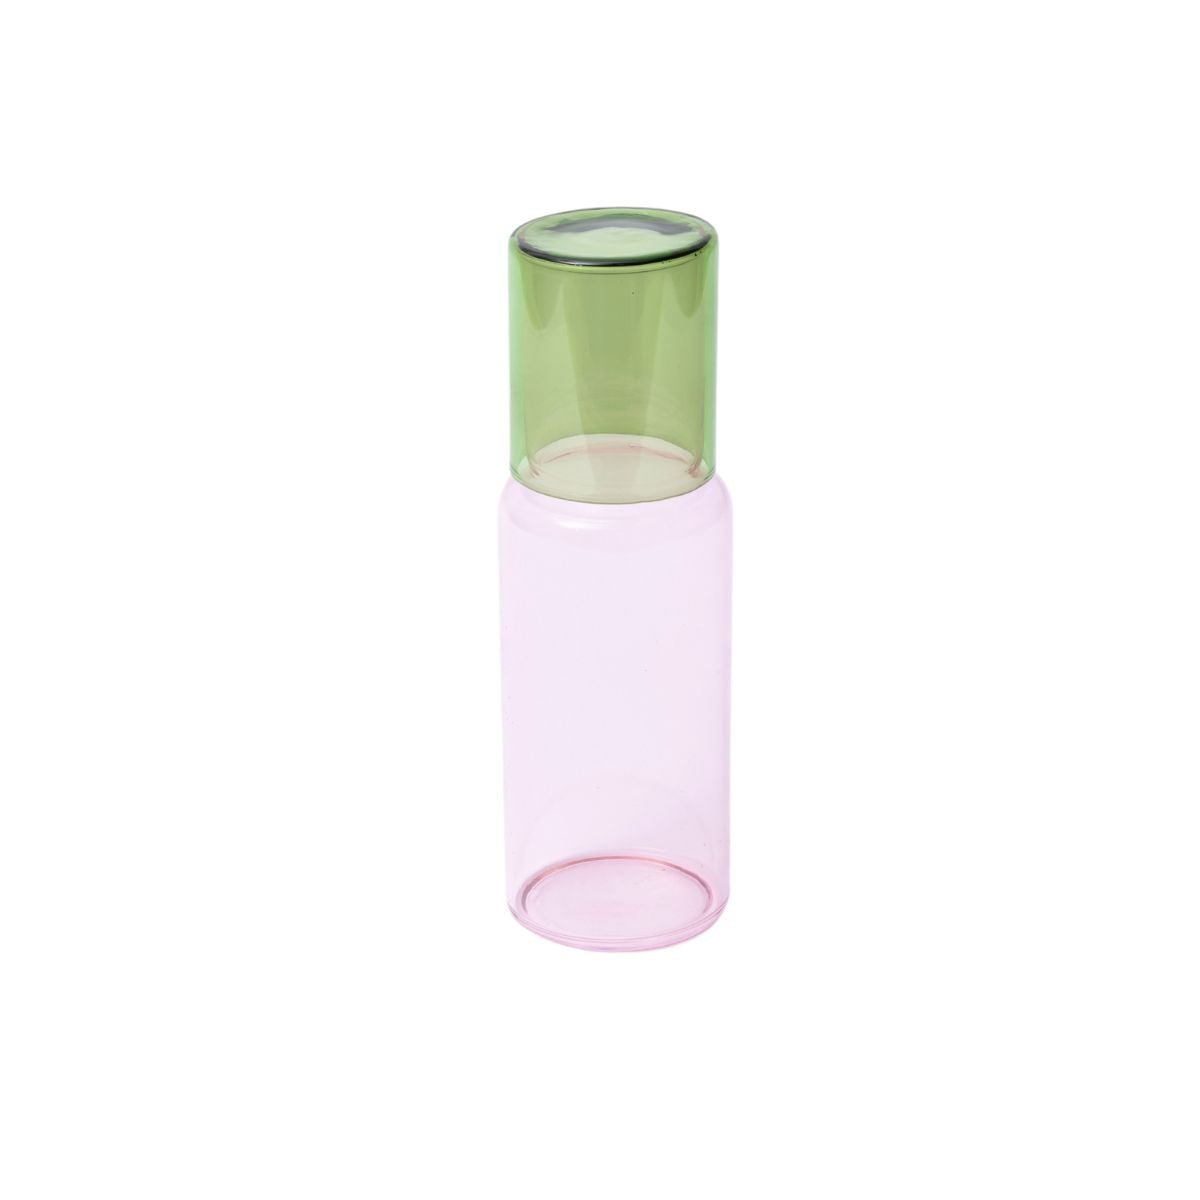 Duo Tone Glass Carafe - Pink/Green - Life of Riley